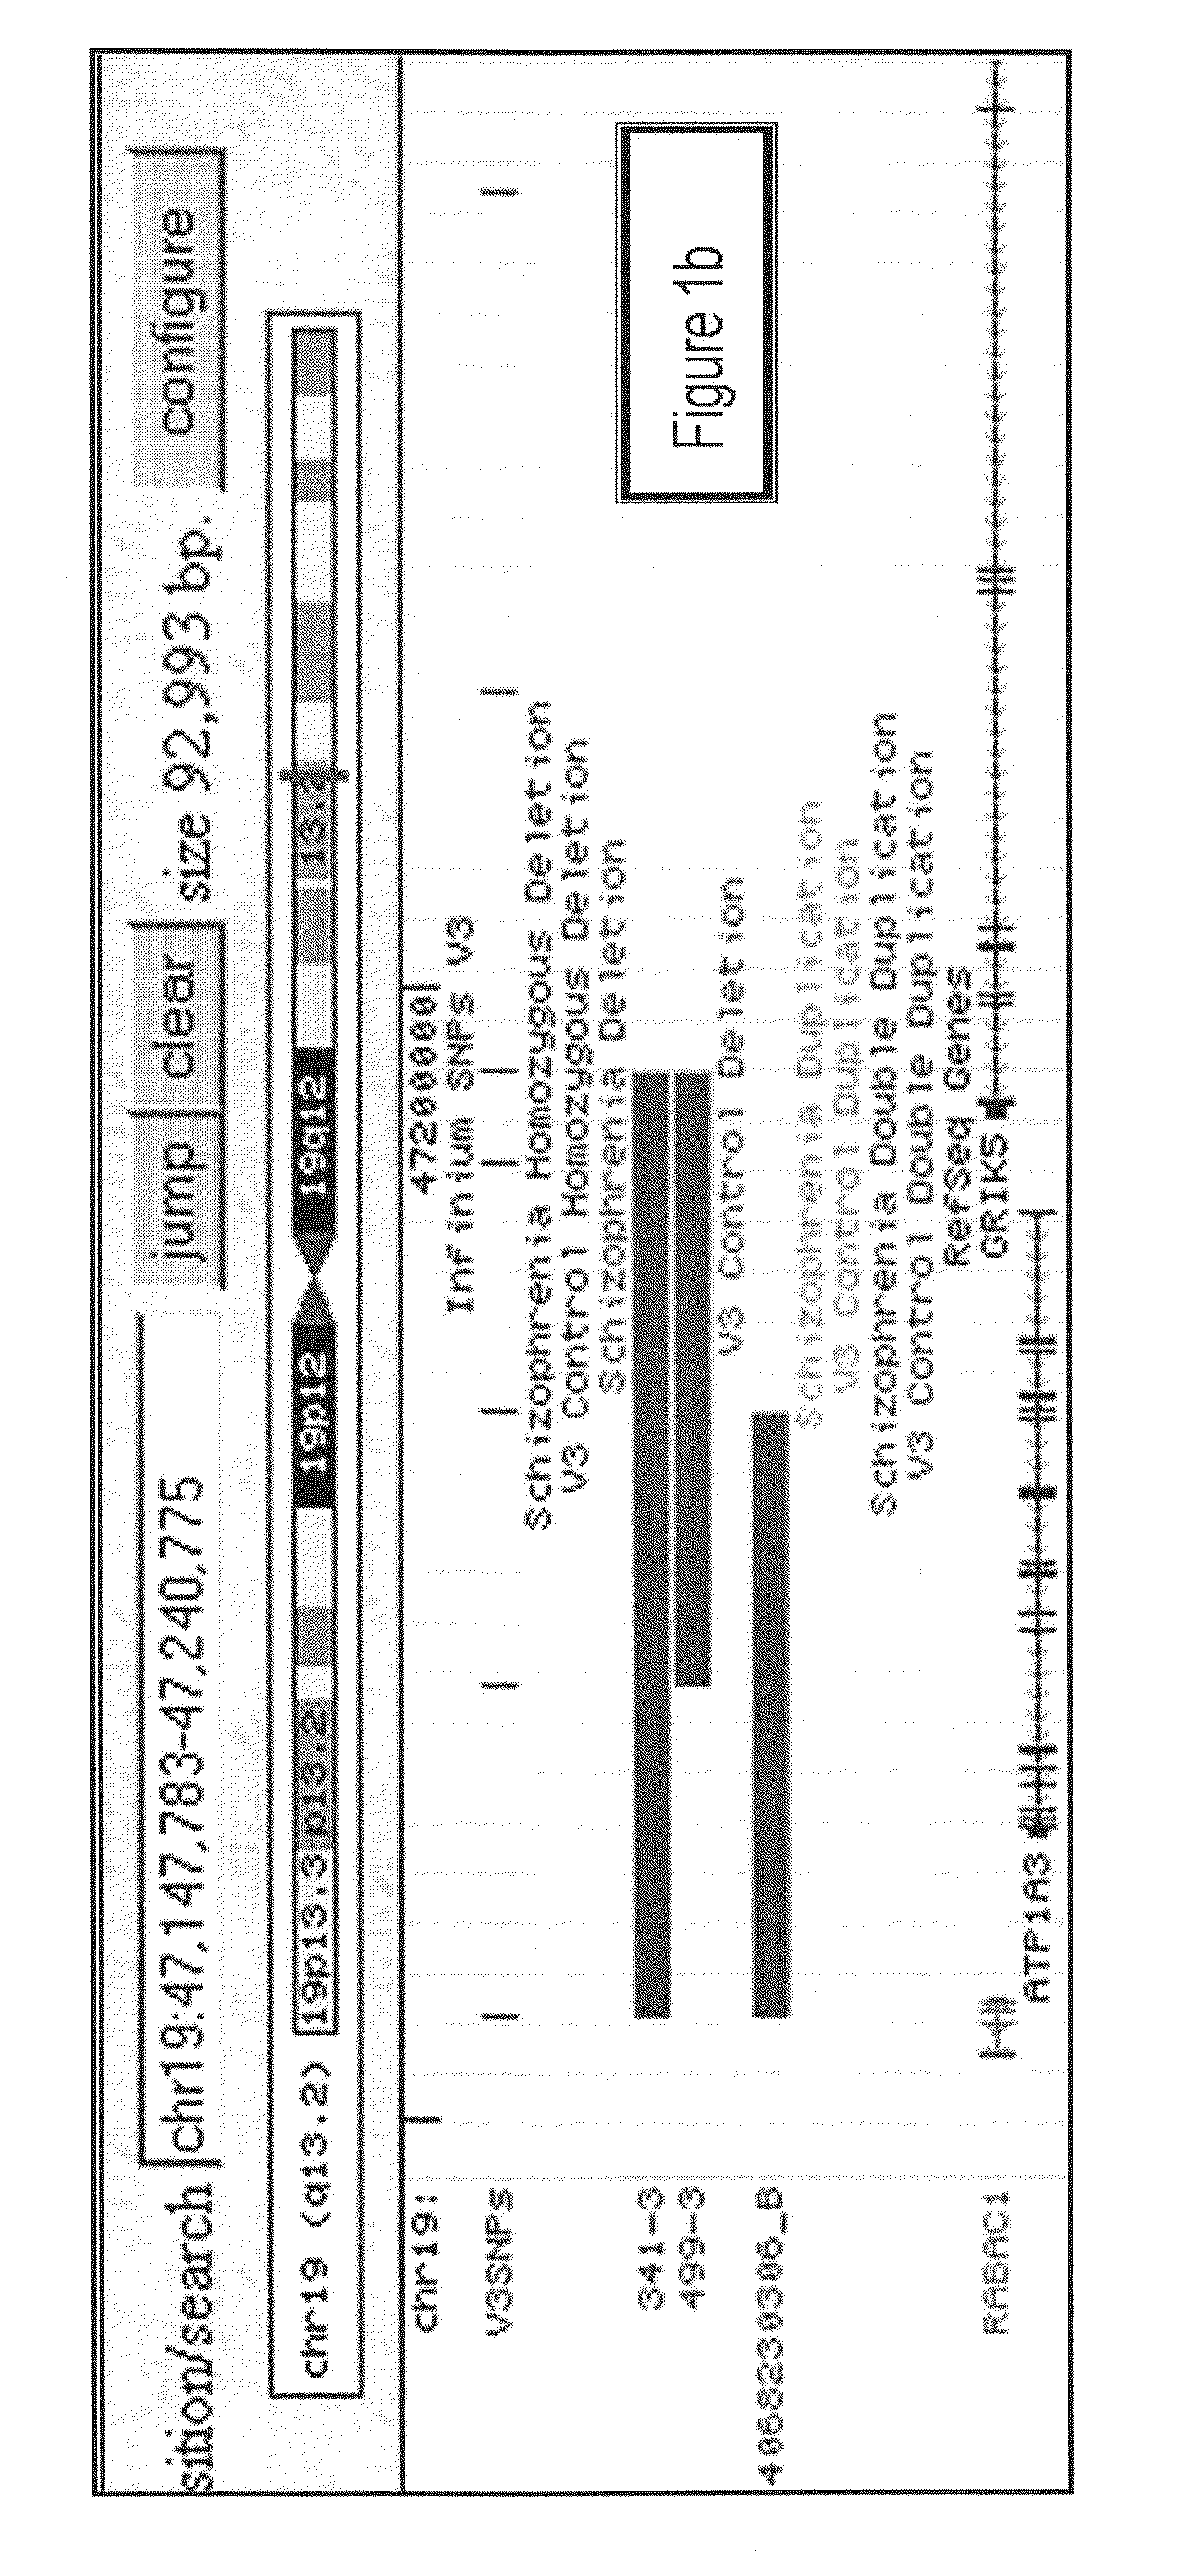 Genetic Alterations Associated with Schizophrenia and Methods of Use Thereof for the Diagnosis and Treatment of the Same